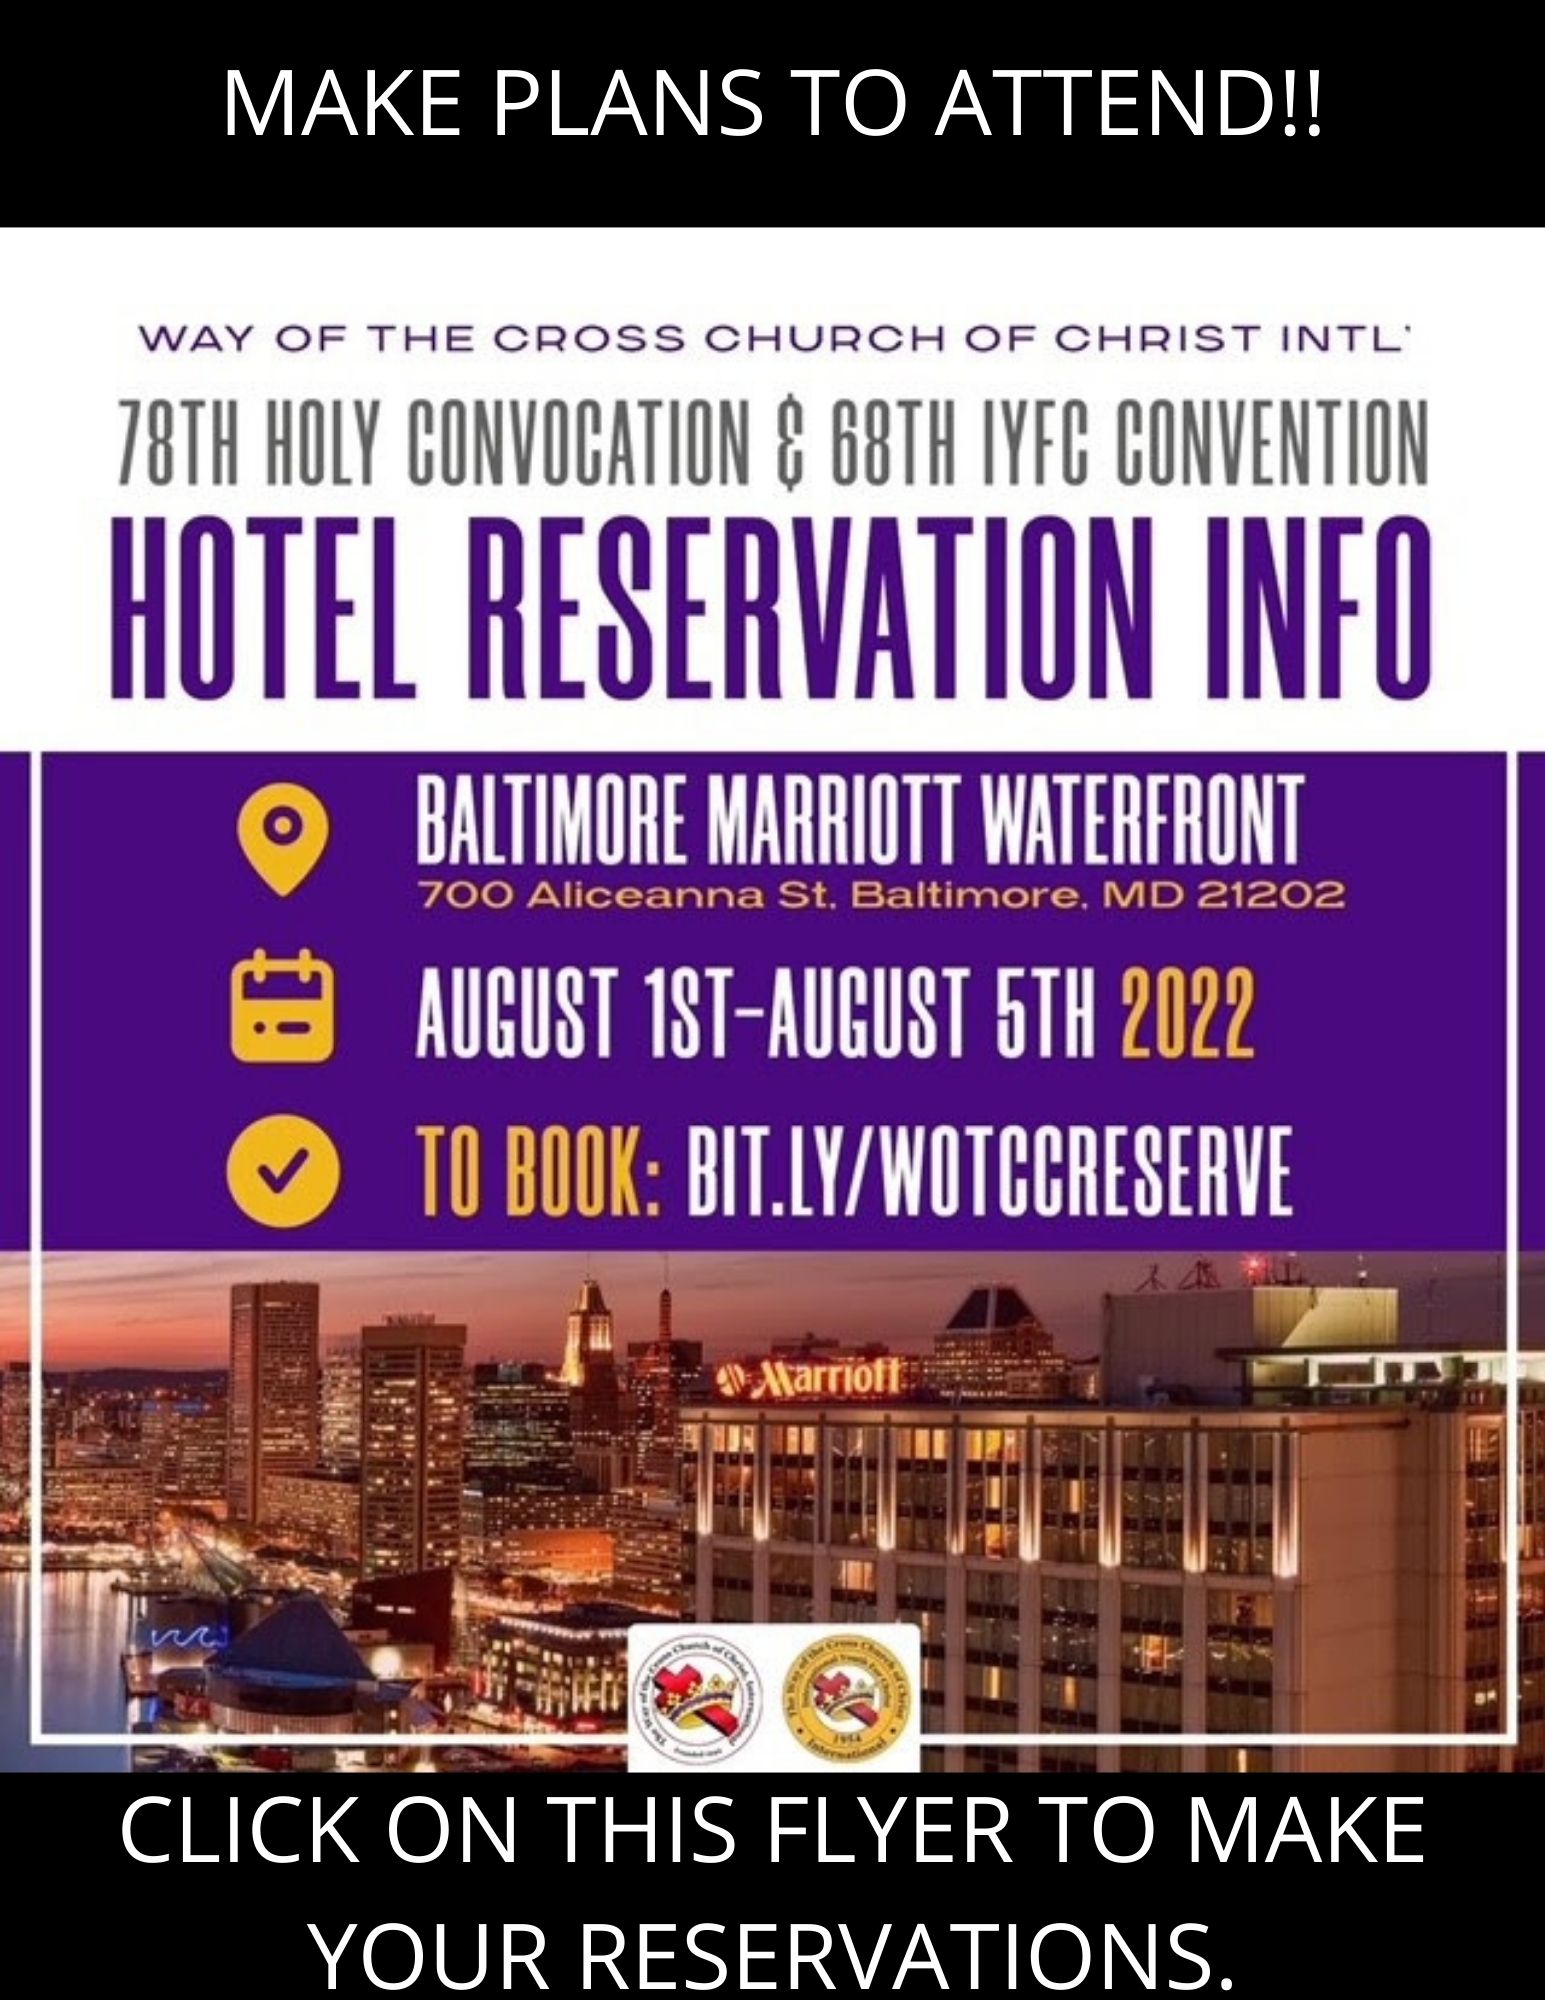 CLICK-ON-THE-FLYER-TO-MAKE-RESERVATIONS.